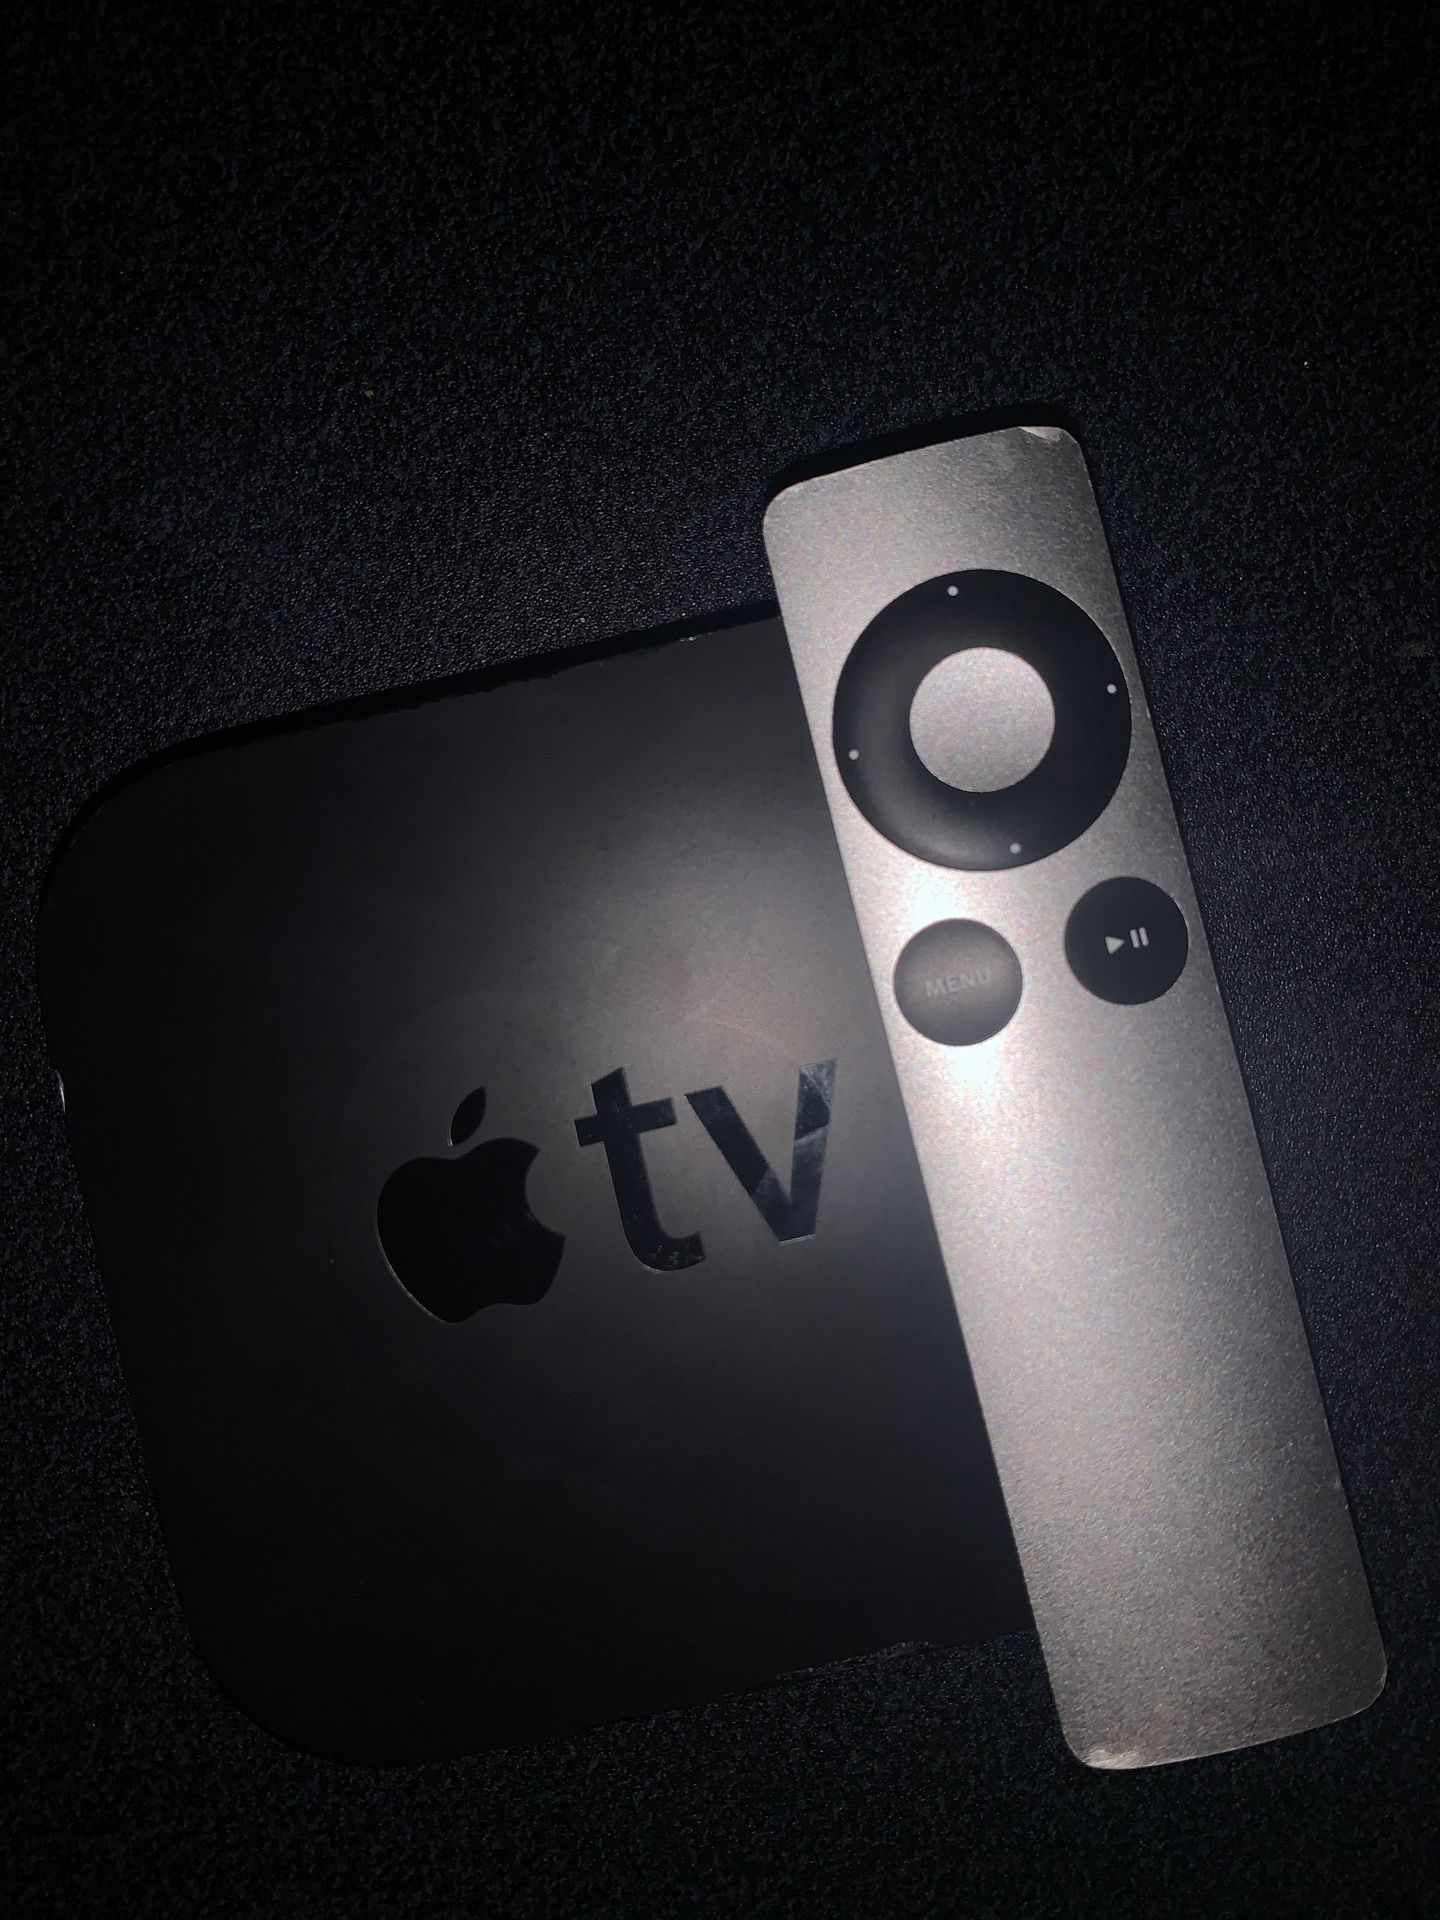 Apple TV 3rd Gen works perfect need wall plug 6.99 on amazon can bring one to test it